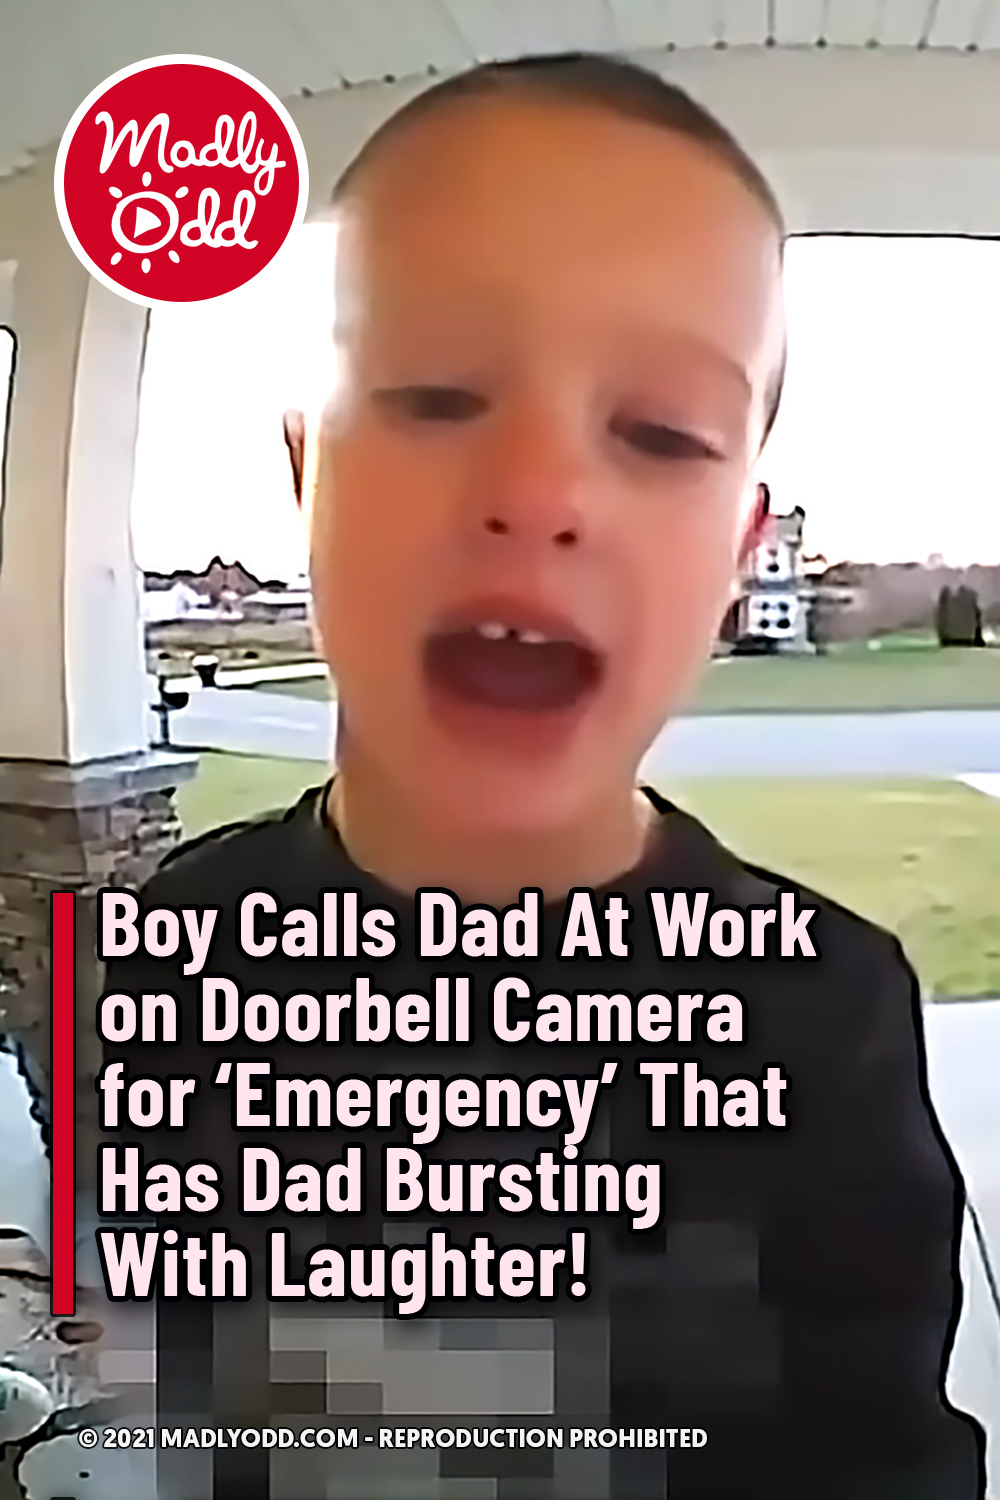 Boy Calls Dad At Work on Doorbell Camera for \'Emergency\' That Has Dad Bursting With Laughter!